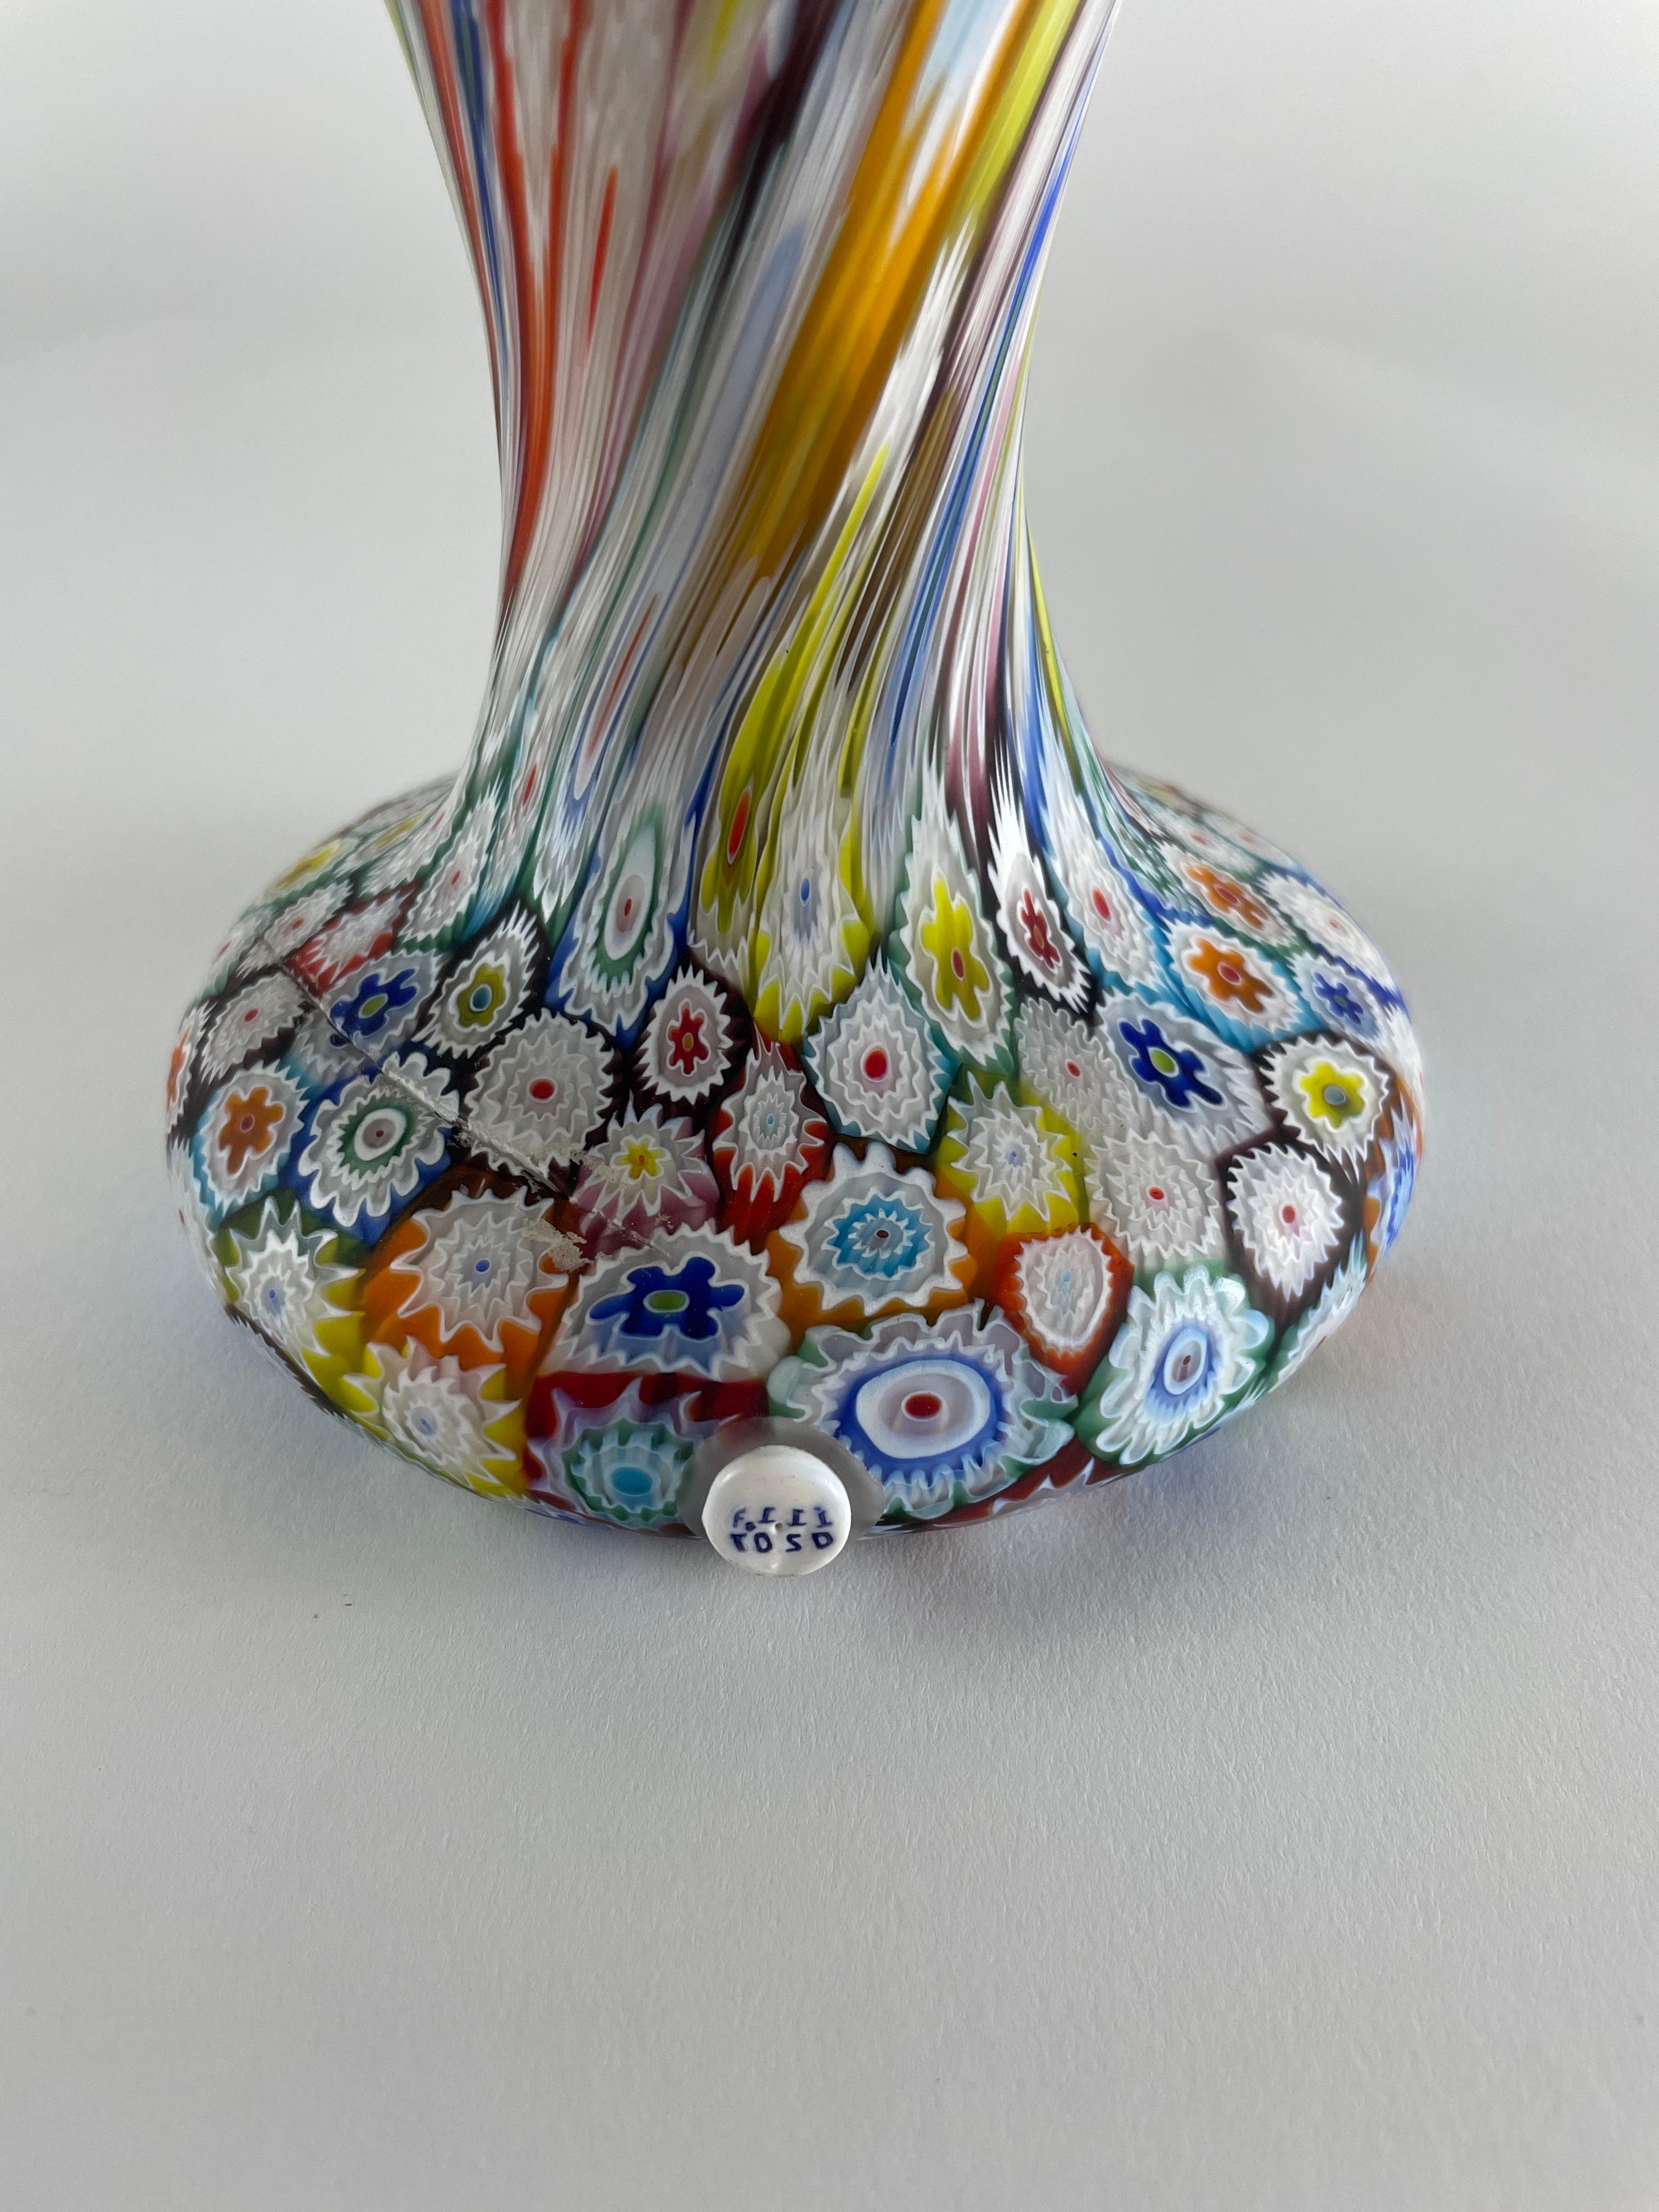 Vase made by Fratelli Toso glassworks, Murano, in the 1950s. Fratelli Toso has always specialized in working with murrine, the company's true spearhead. The vase is made from the classic millefiori murrina; several types were used, different in